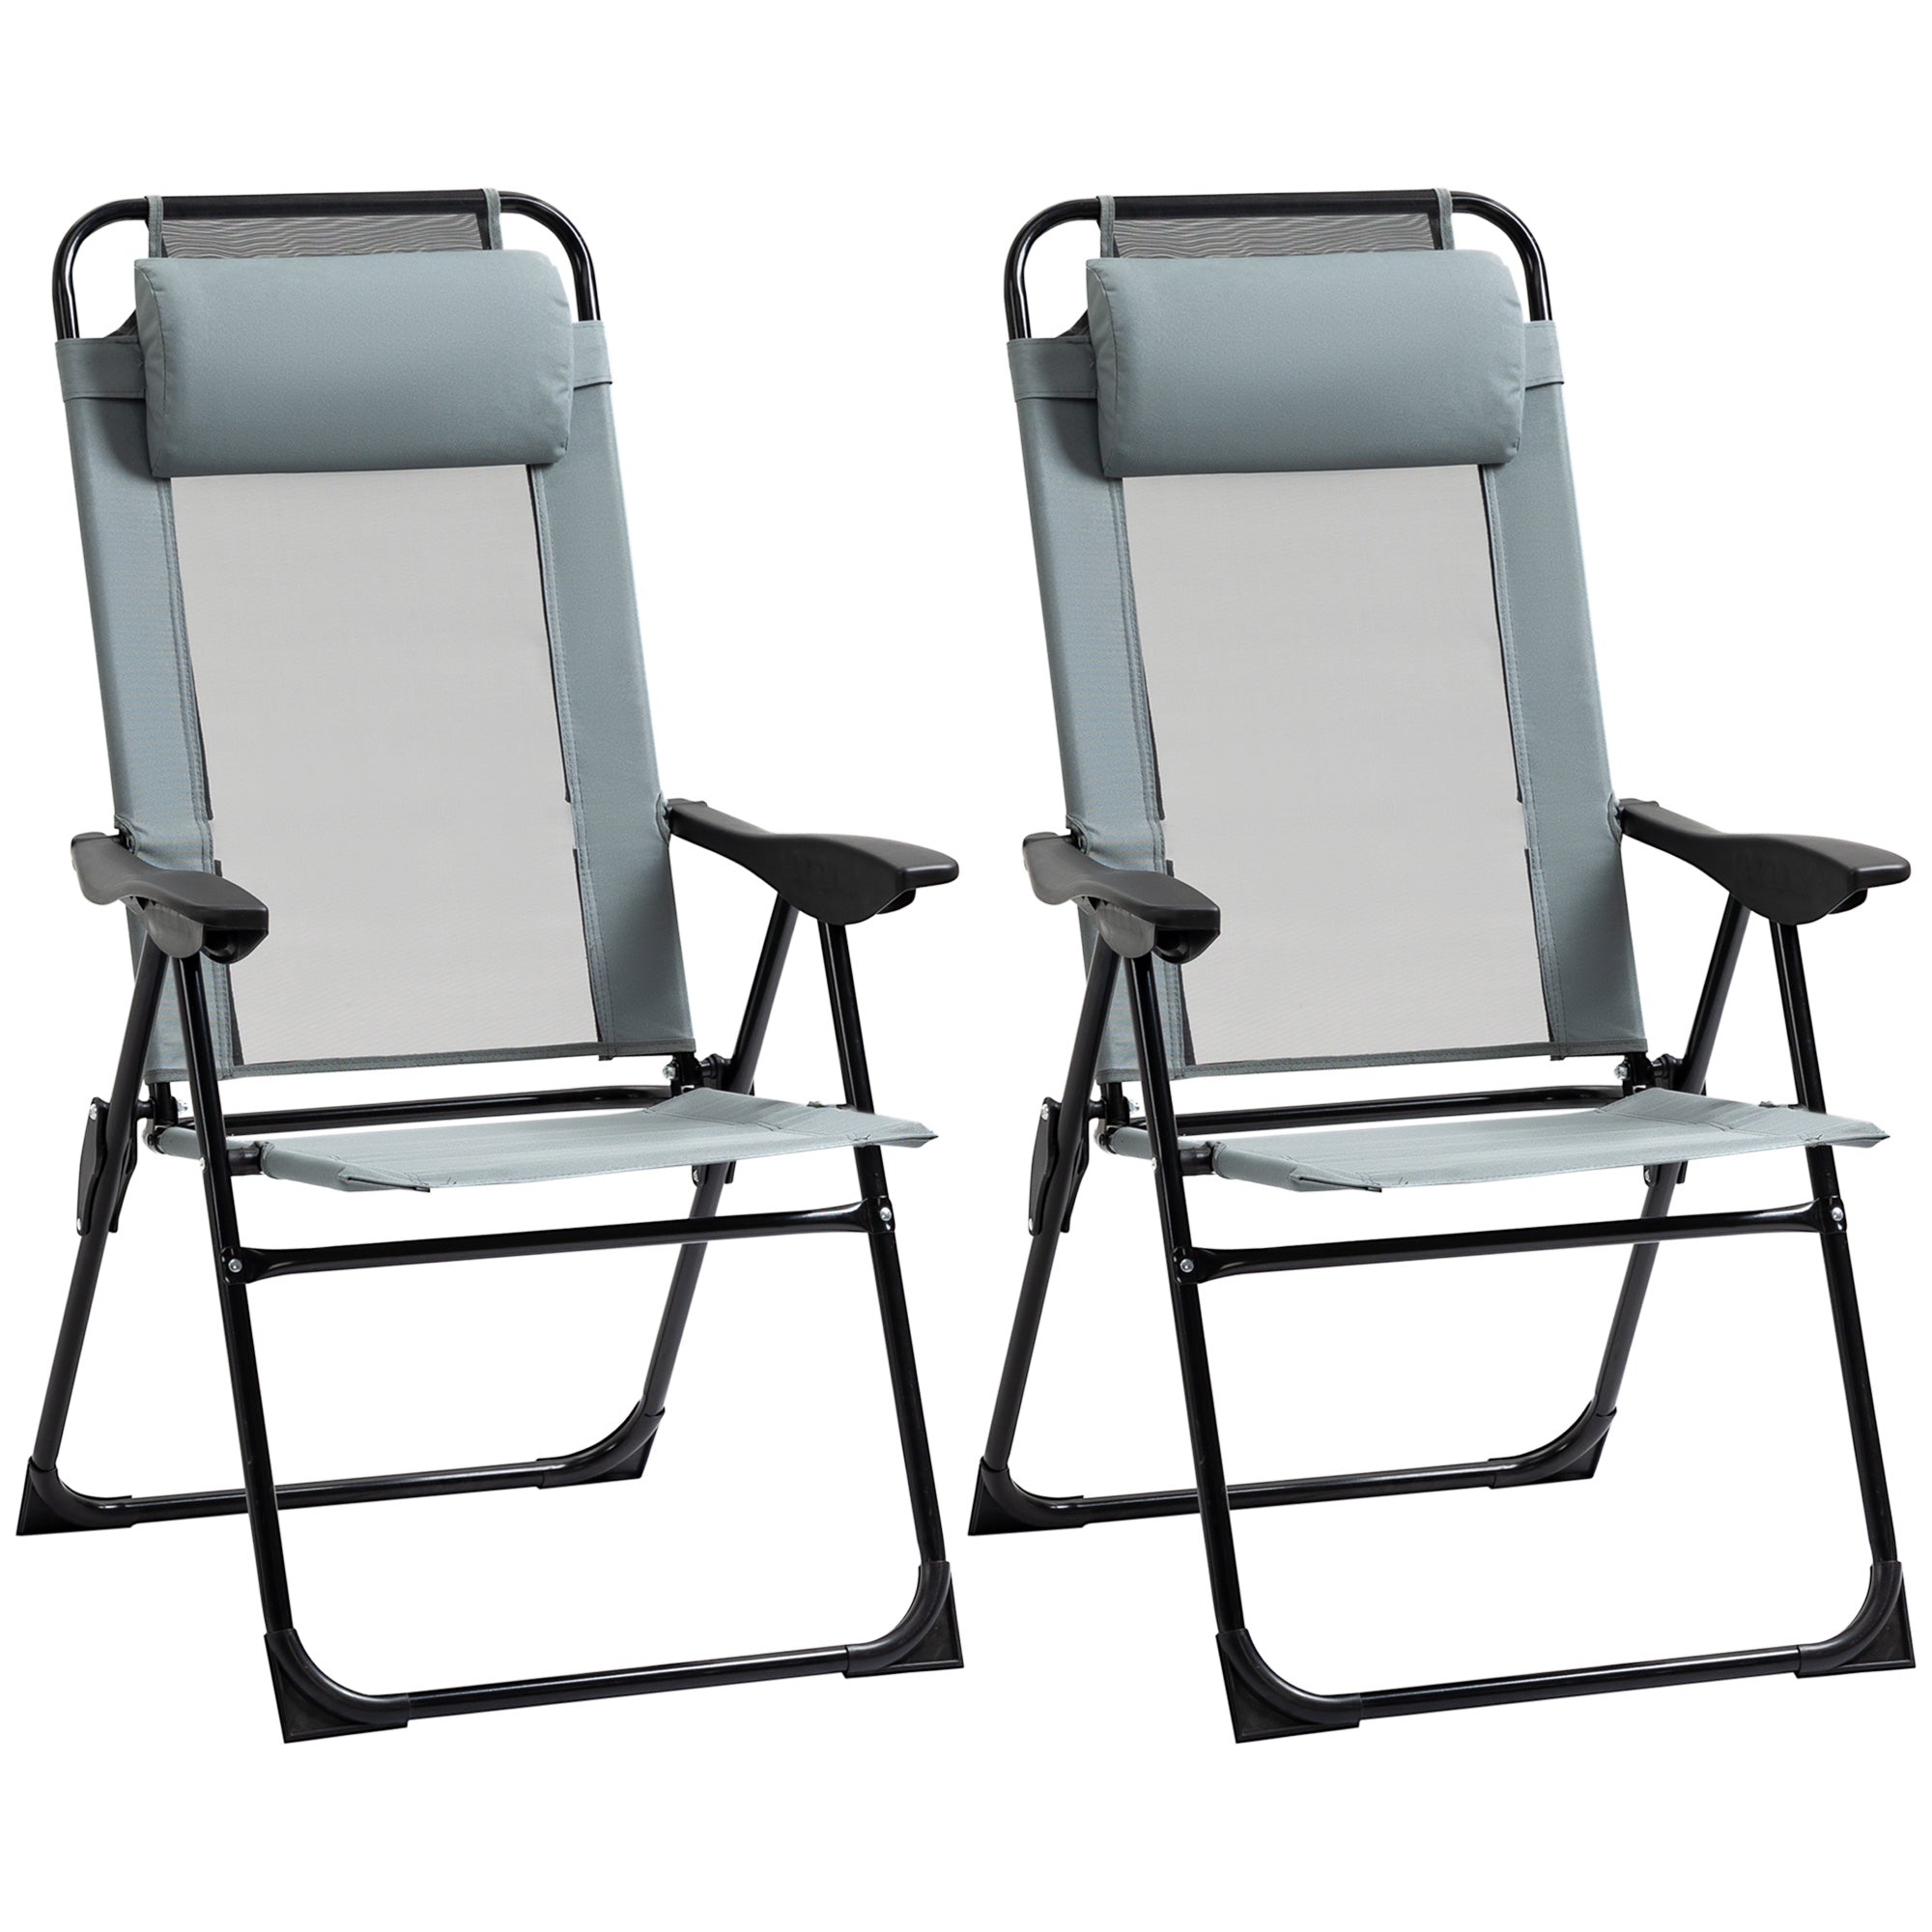 Set of 2 Portable Folding Recliner Chair Outdoor Patio Chaise Lounge Chair with Adjustable Backrest, Grey-1